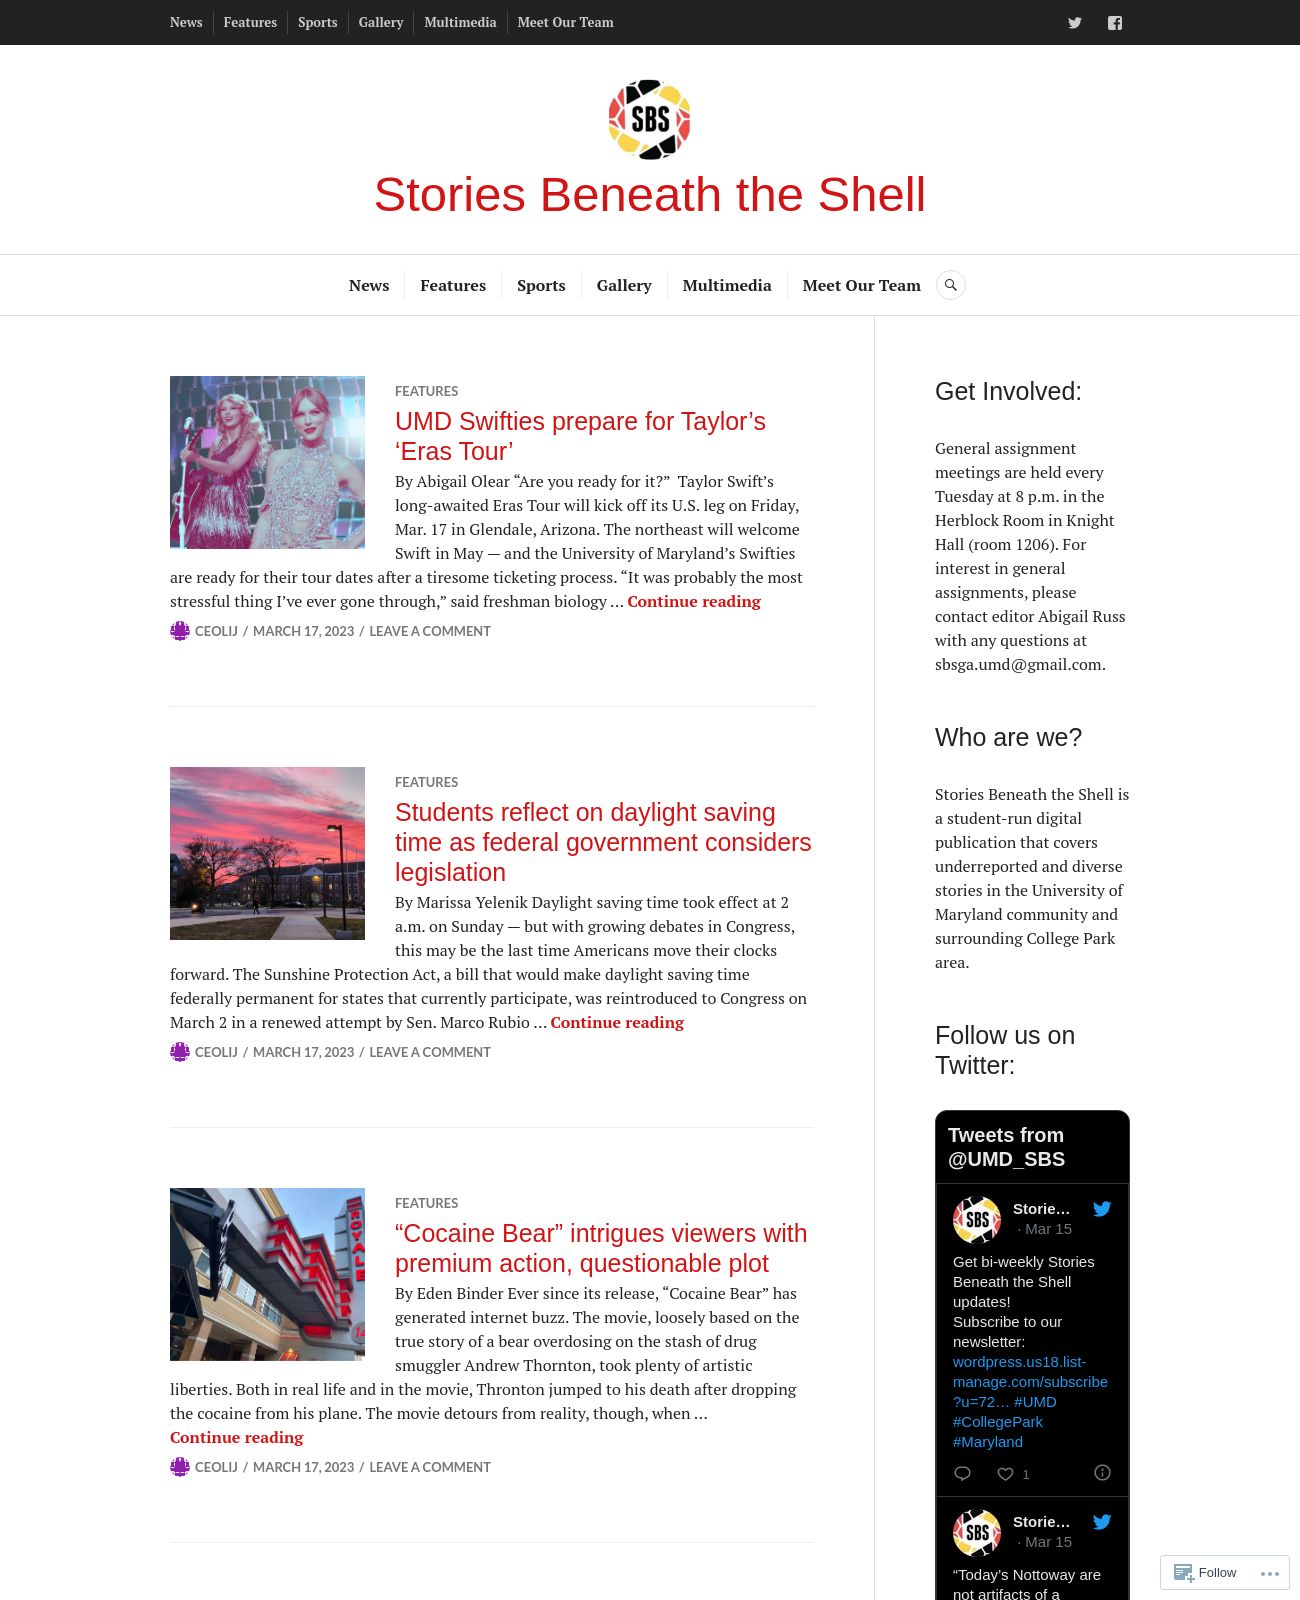 Stories Beneath the Shell at 2023-03-17 20:38:37-04:00 local time